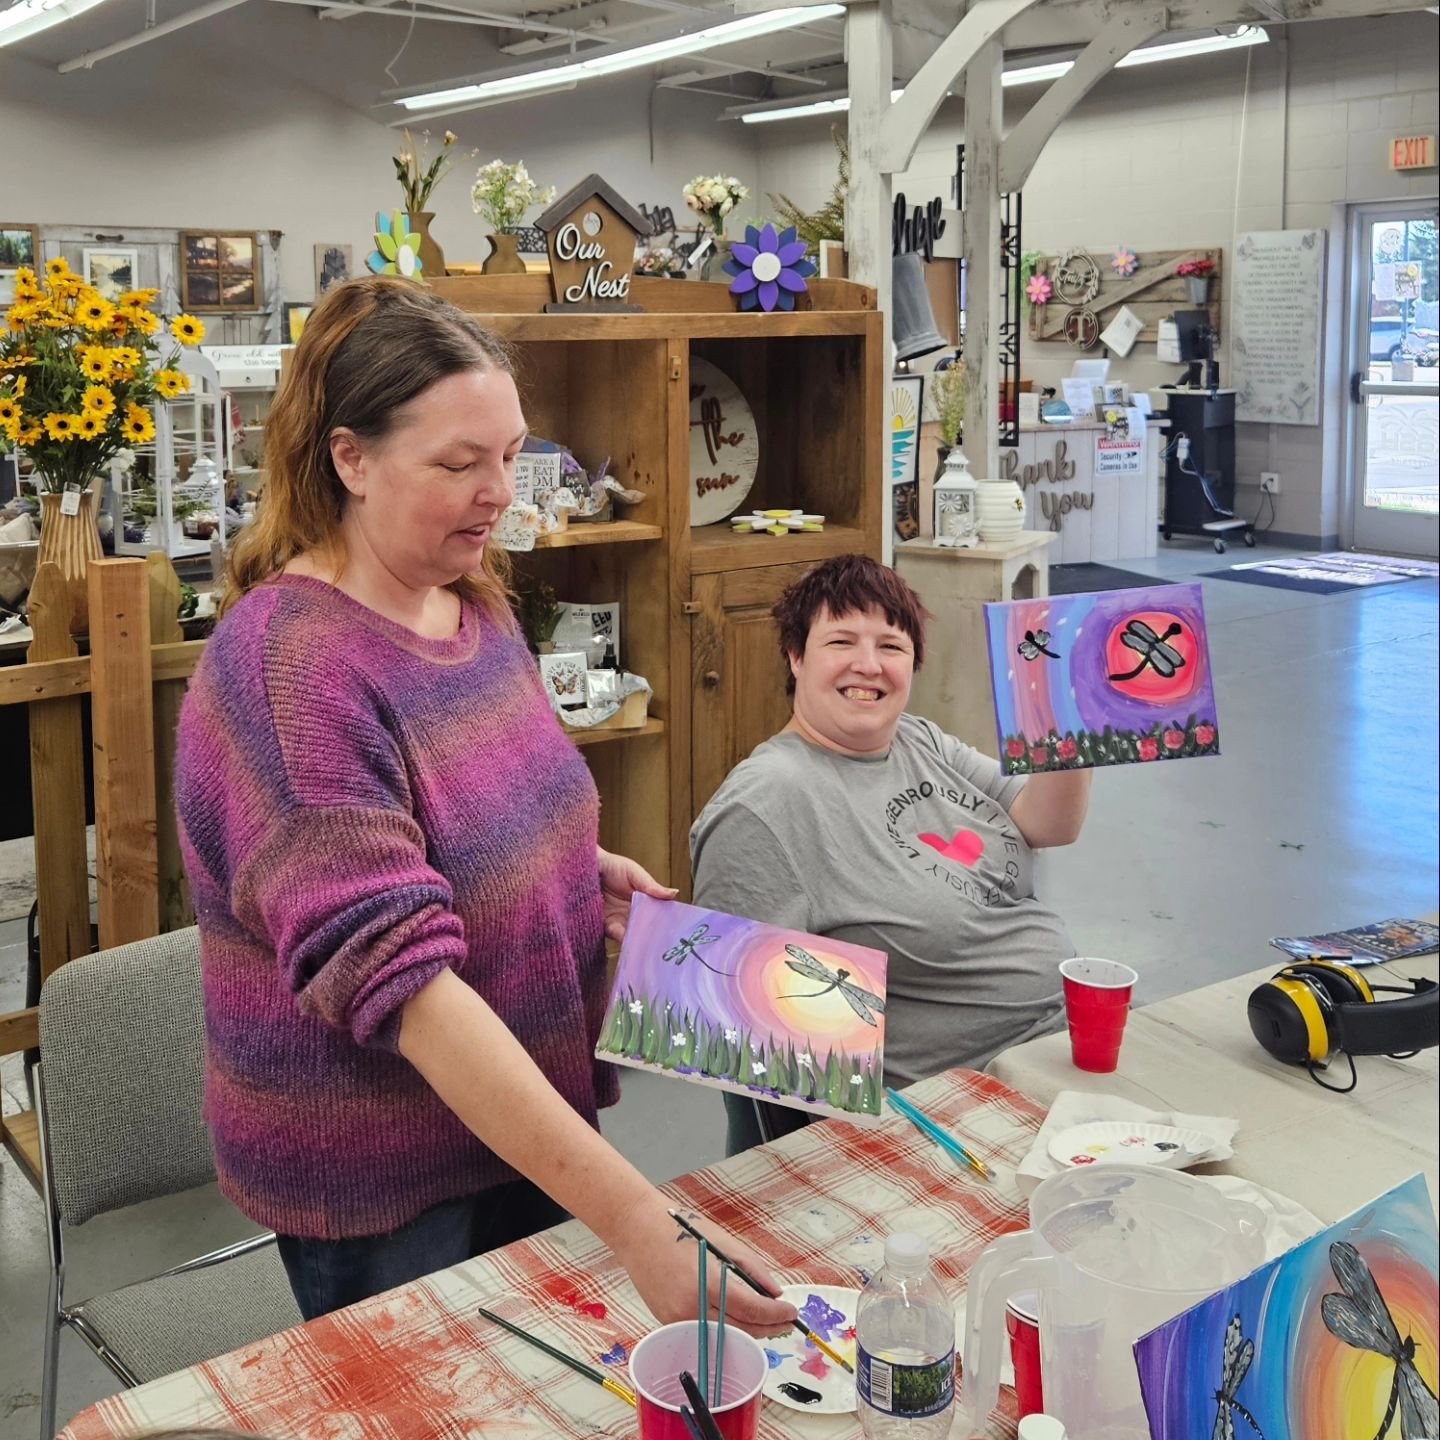 Everyone had a WONDERFUL TIME at Creating with Purpose class! Thank you so much to our guest artist, Carmen Kundinger! We appreciate you sharing your time and talent with us and we loved painting these beautiful dragonfly pictures with you!